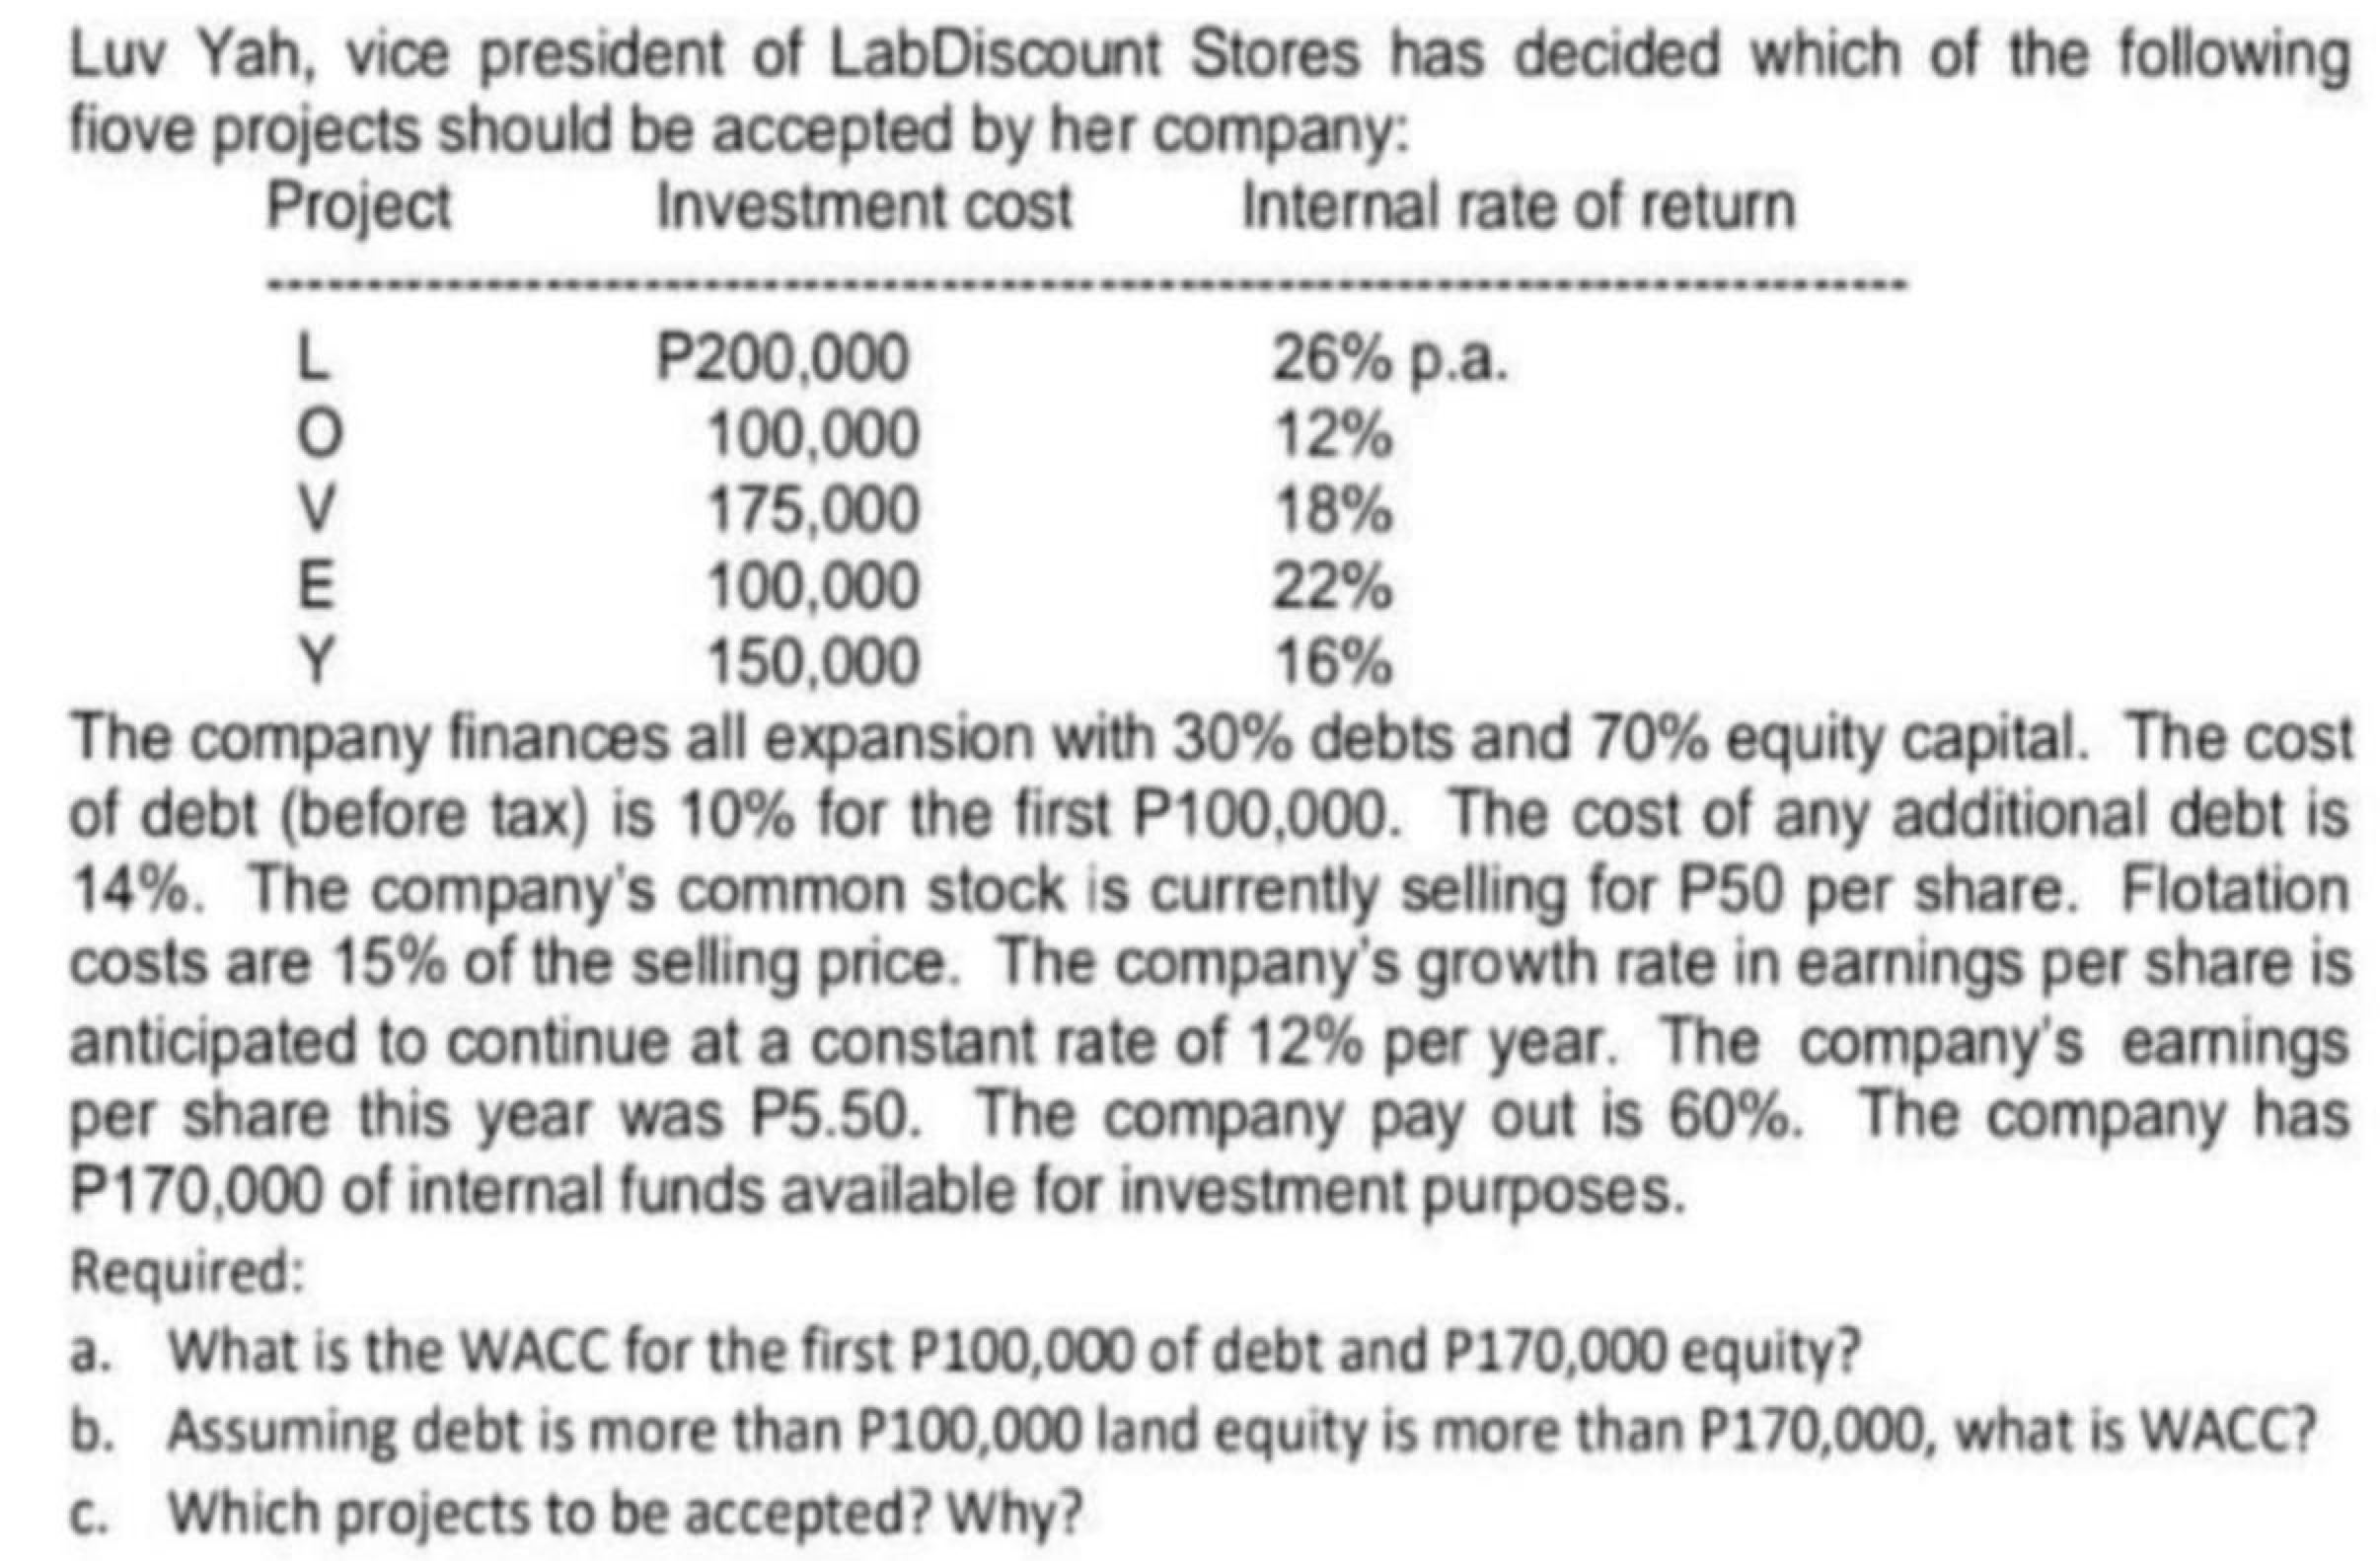 Luv Yah, vice president of LabDiscount Stores has decided which of the following
fiove projects should be accepted by her company:
Project
Investment cost
Internal rate of return
LOVE
P200,000
100,000
175,000
100,000
150,000
26% p.a.
12%
18%
22%
16%
Y
The company finances all expansion with 30% debts and 70% equity capital. The cost
of debt (before tax) is 10% for the first P100,000. The cost of any additional debt is
14%. The company's common stock is currently selling for P50 per share. Flotation
costs are 15% of the selling price. The company's growth rate in earnings per share is
anticipated to continue at a constant rate of 12% per year. The company's earnings
per share this year was P5.50. The company pay out is 60%. The company has
P170,000 of internal funds available for investment purposes.
Required:
a. What is the WACC for the first P100,000 of debt and P170,000 equity?
b. Assuming debt is more than P100,000 land equity is more than P170,000, what is WACC?
c. Which projects to be accepted? Why?